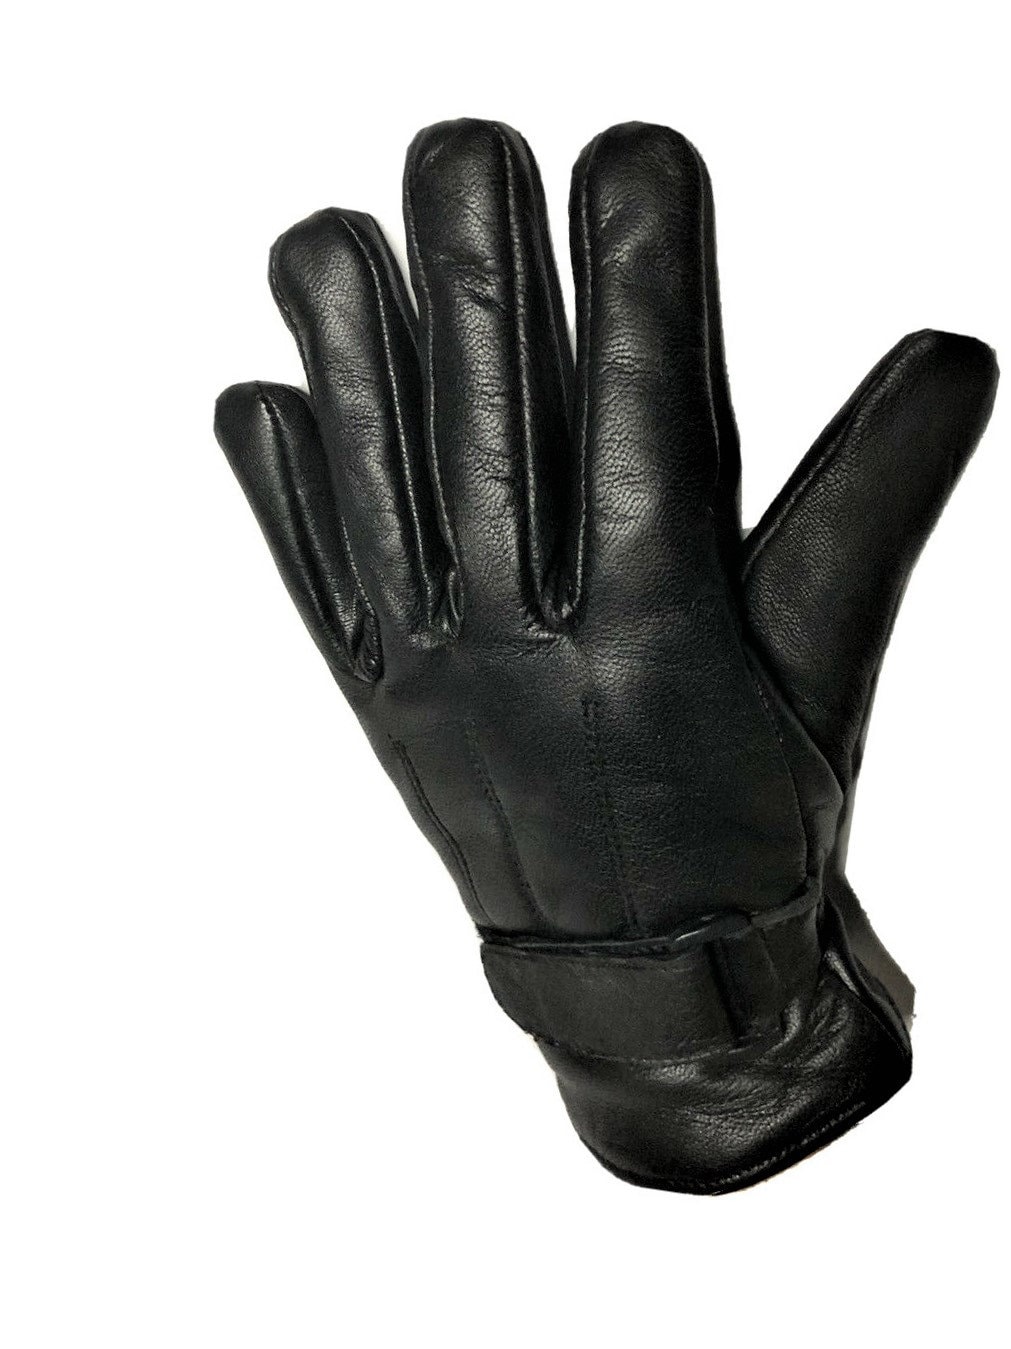 Black Mens Alligator Leather Gloves Drive Work Glove Windproof High Quality  Gift